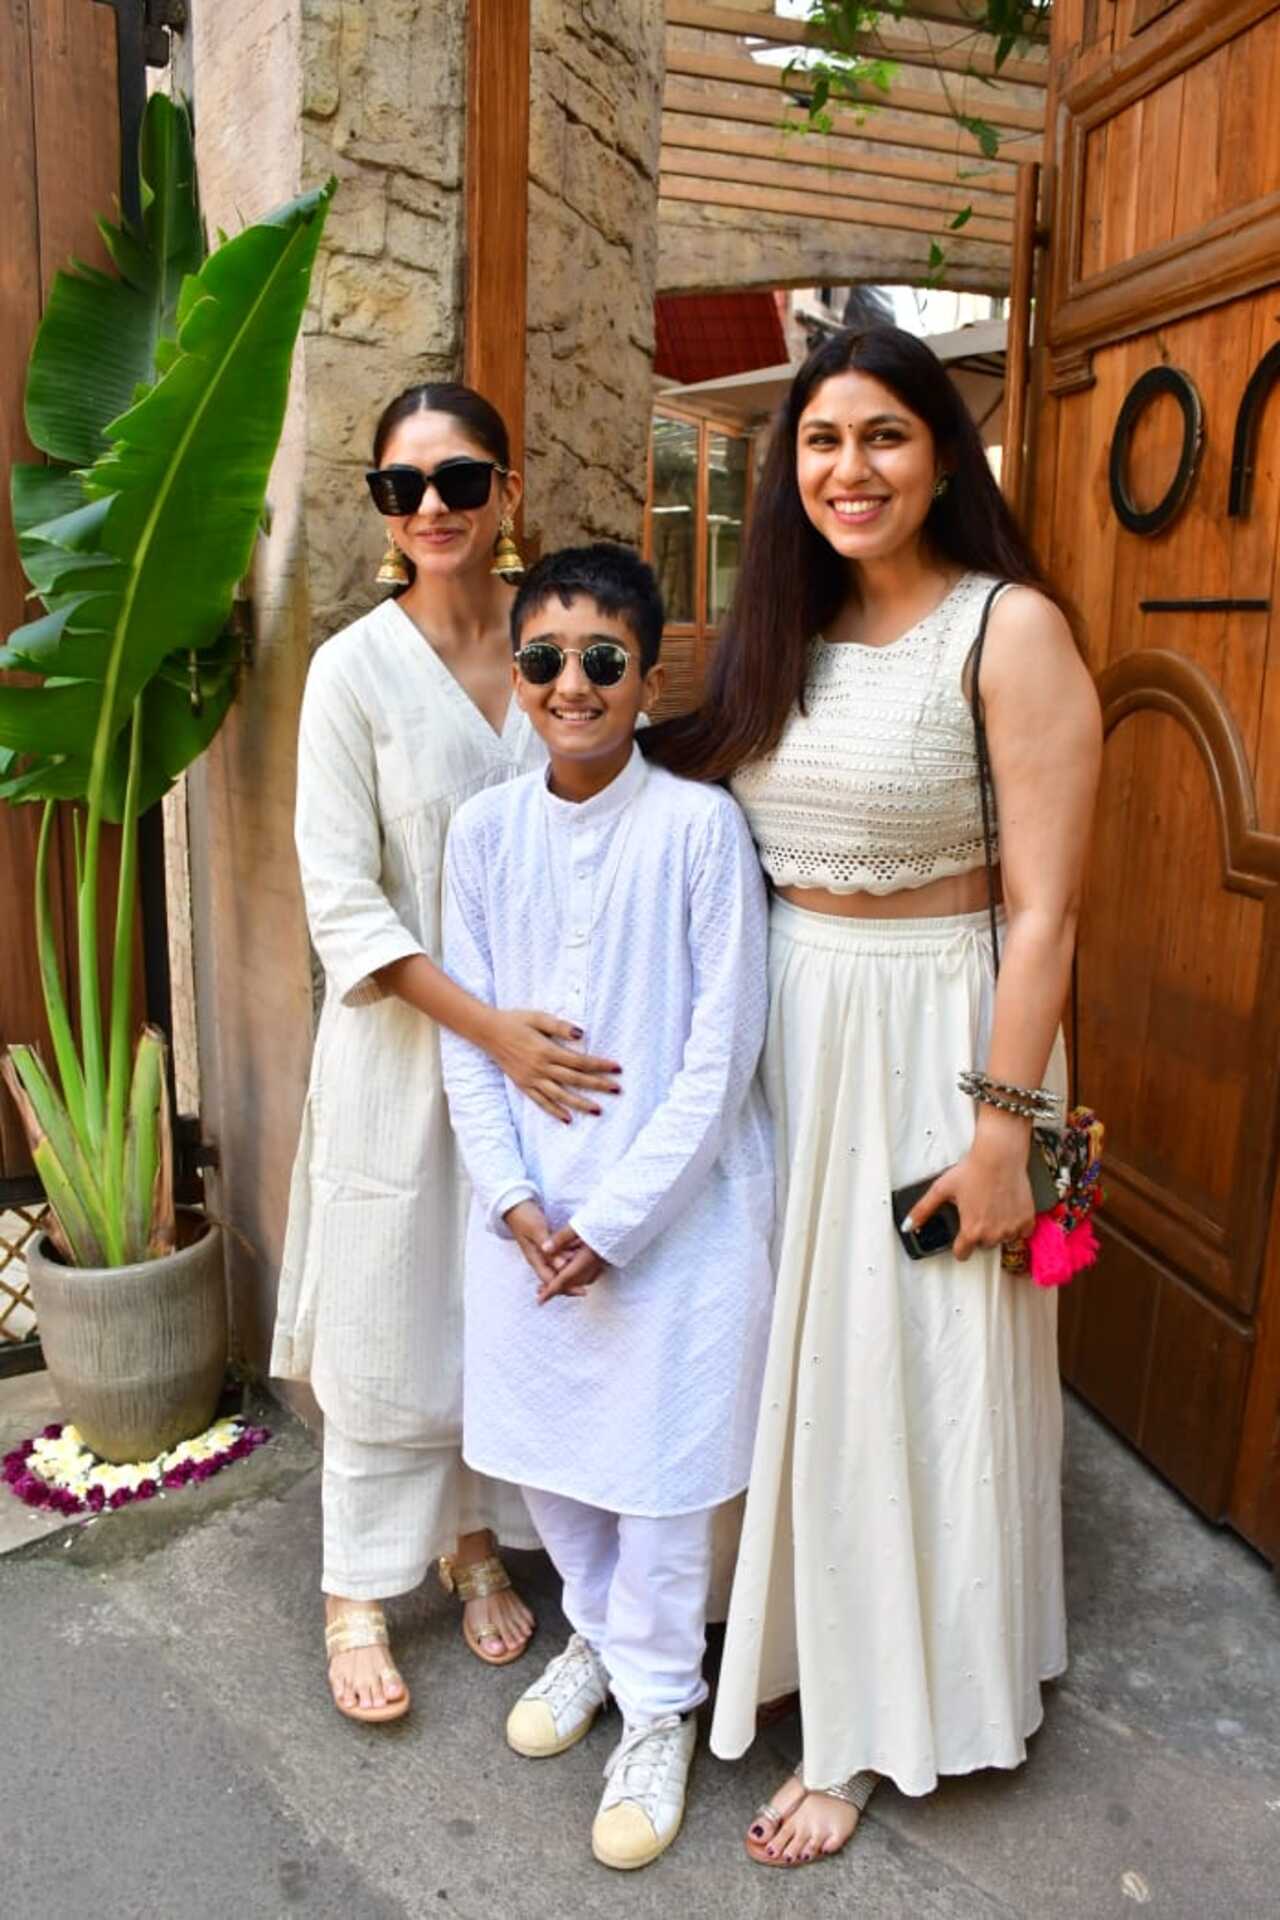 Mrunal posed with her sister and brother